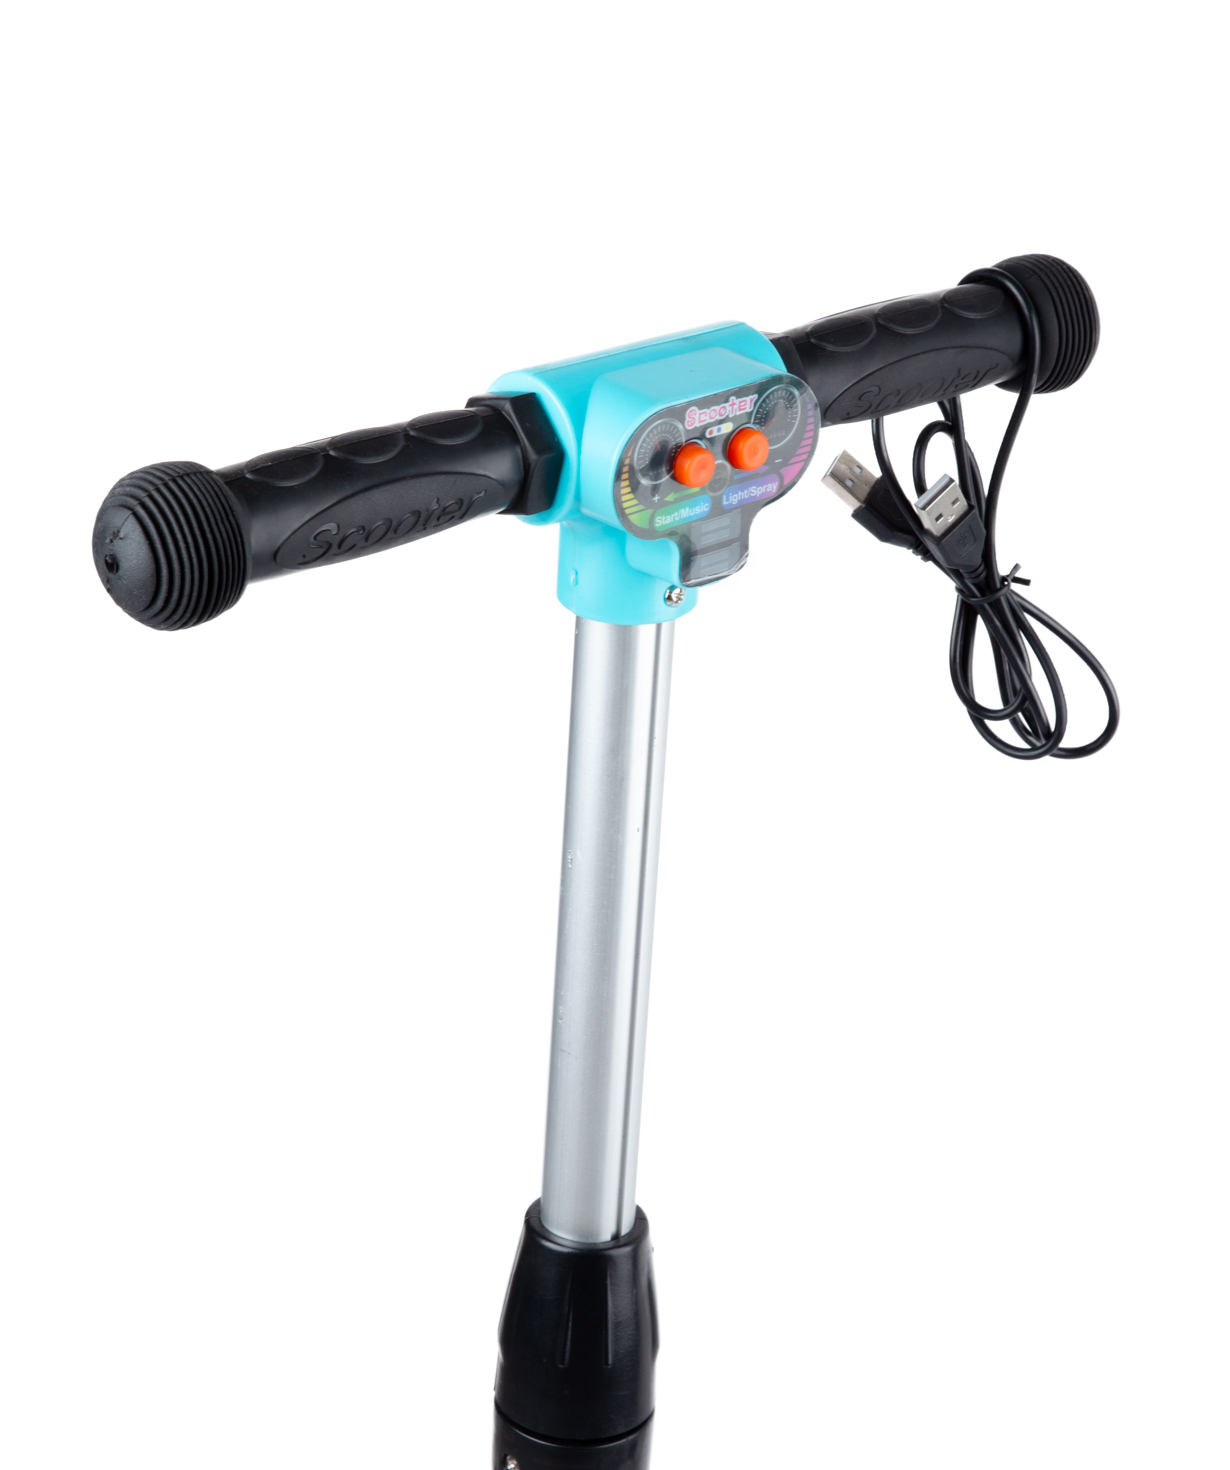 Scooter PE-15073 with light effect, steam and sound signal